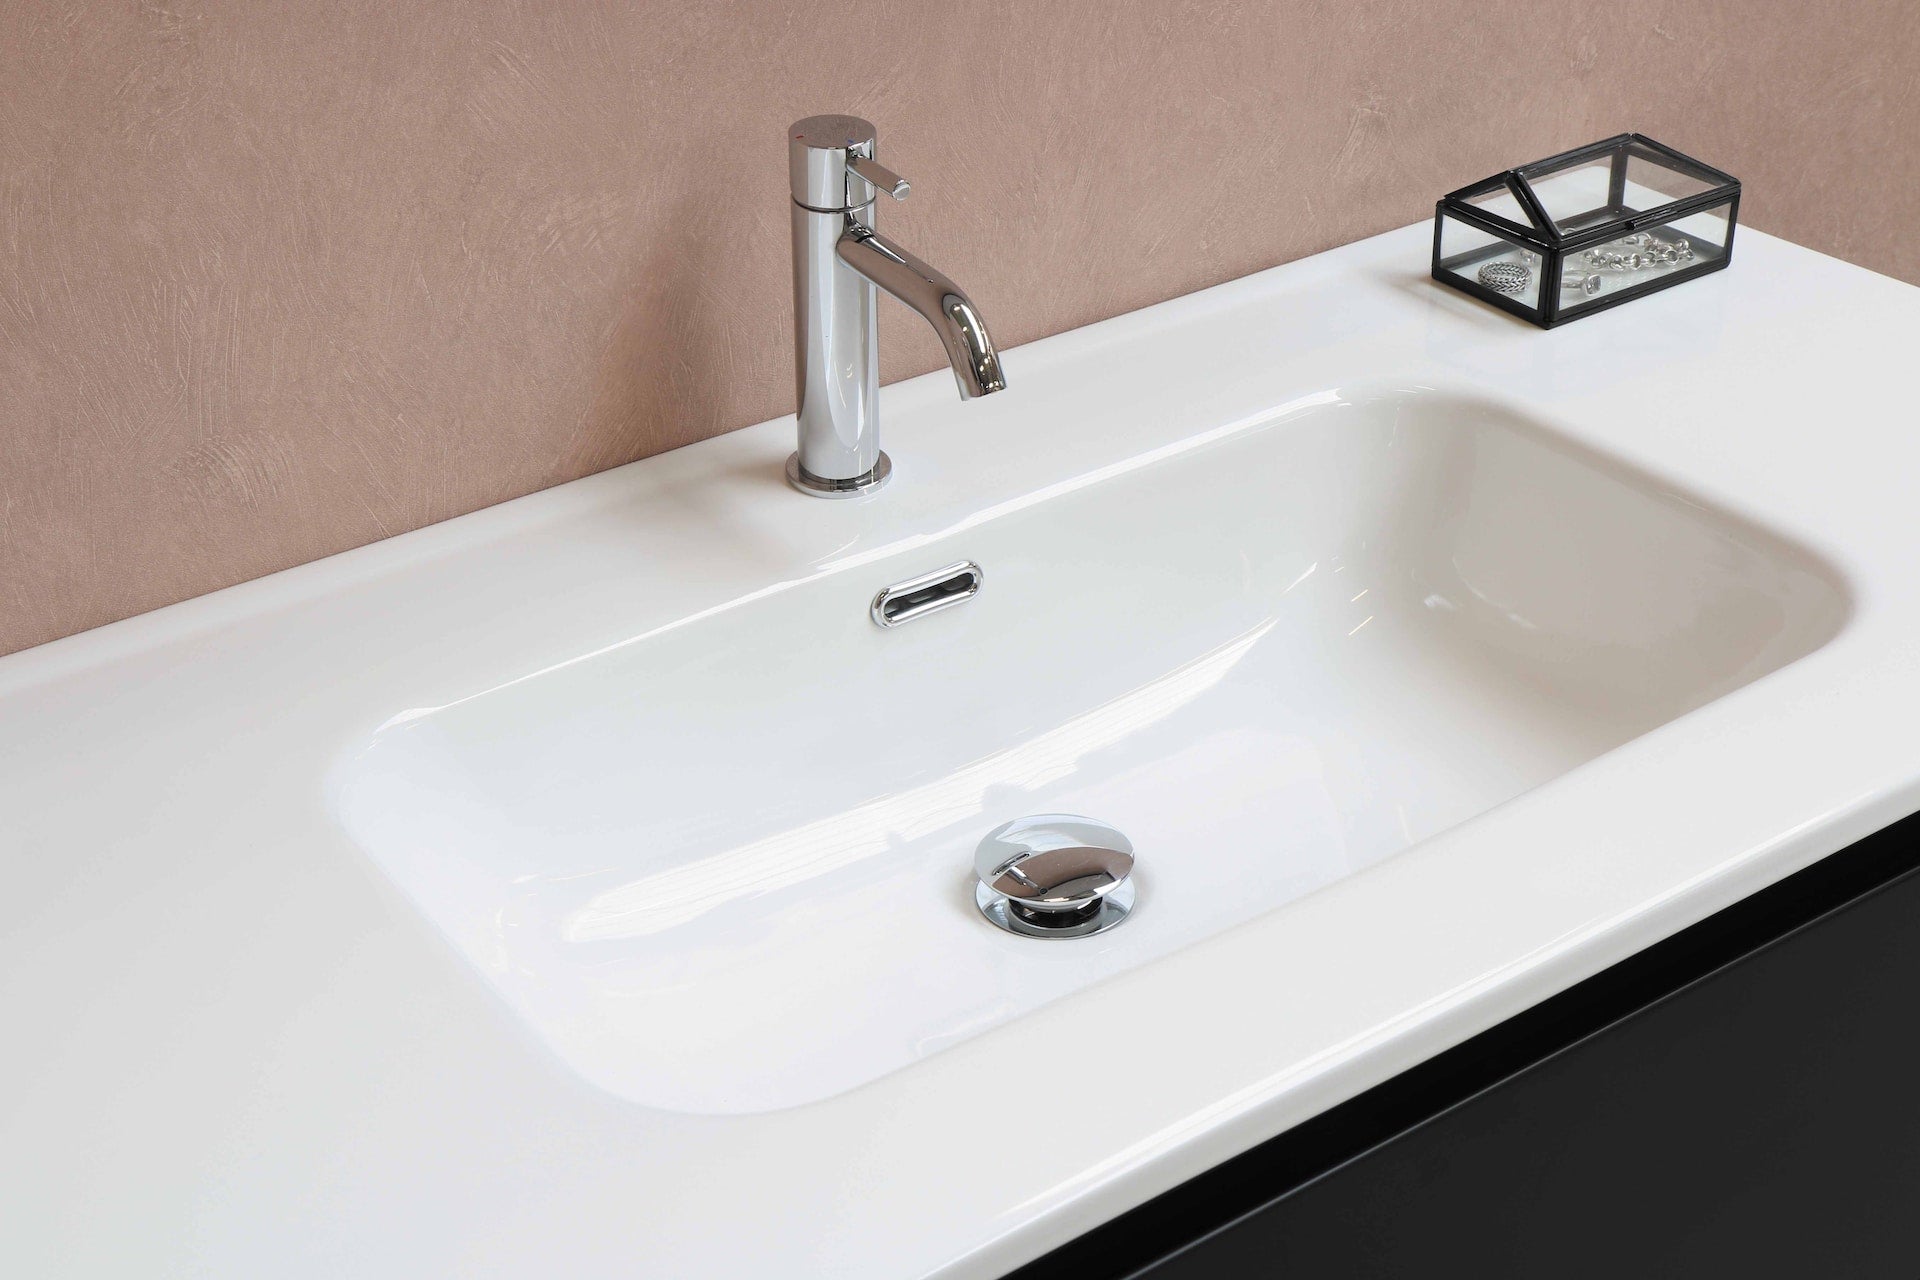 How to Clean a Porcelain Sink